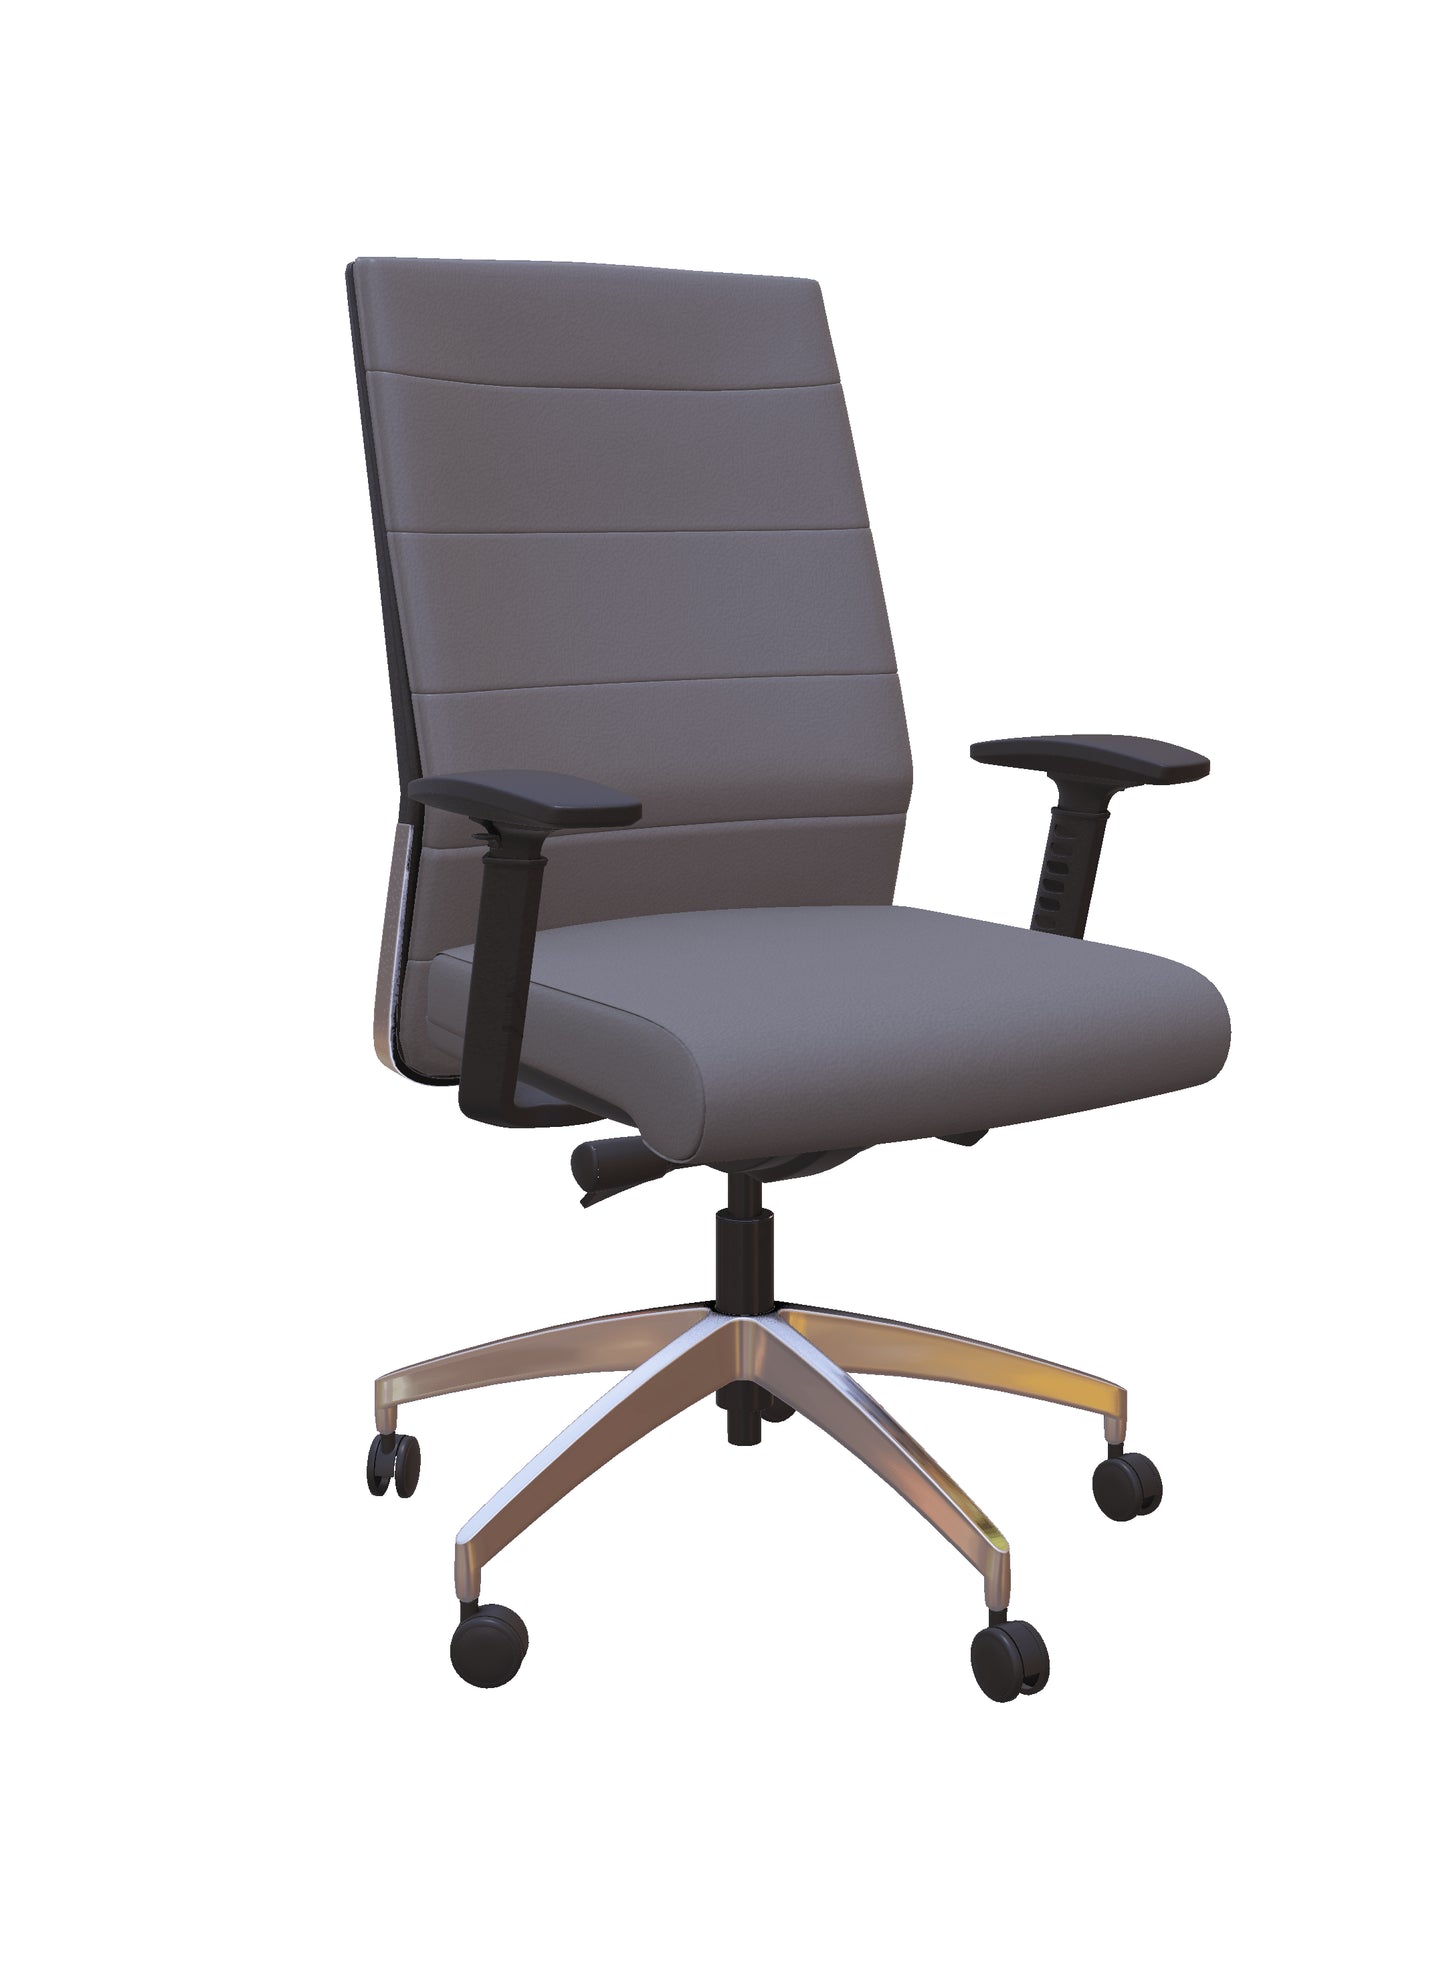 Freeride Executive Leather Office Chair